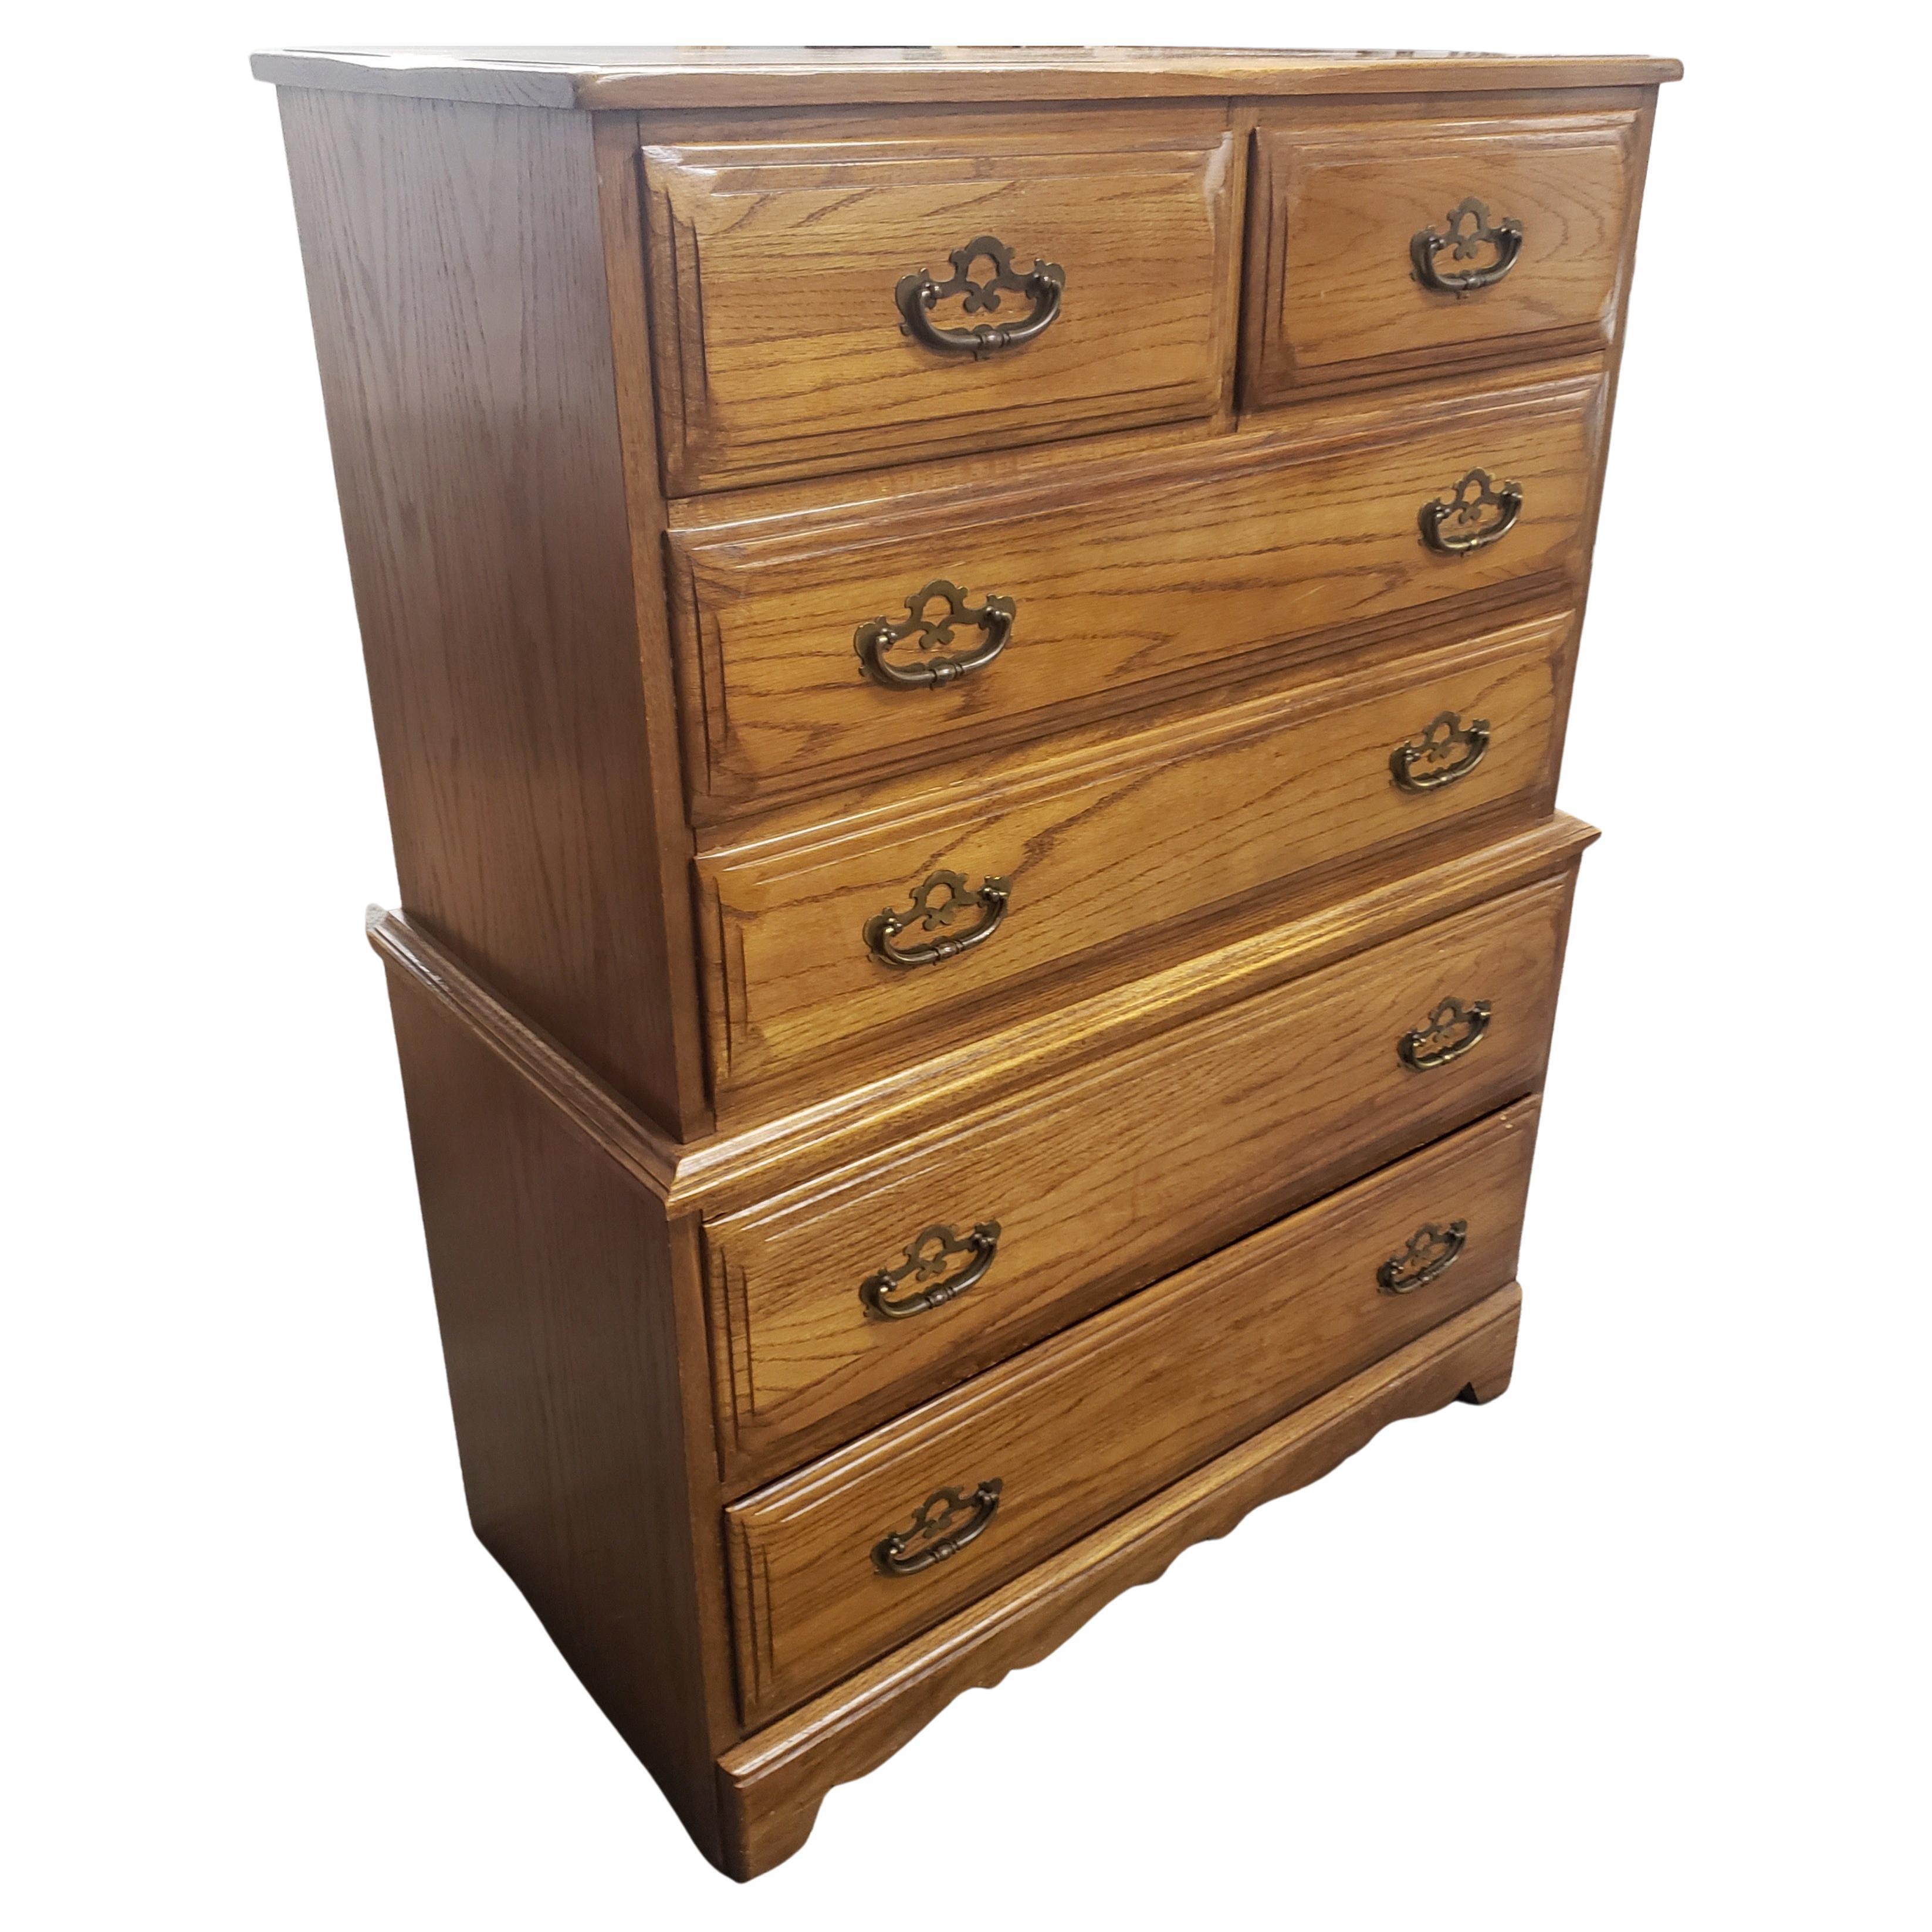 A vintage Ballman Cummings chest of drawers in solid oak and in very good vintage condition, wear consistent with age and use. All drawers are dovetailed joined and functioning perfectly. Measures 36 inches in width, 18 inches in depth and 47 inches